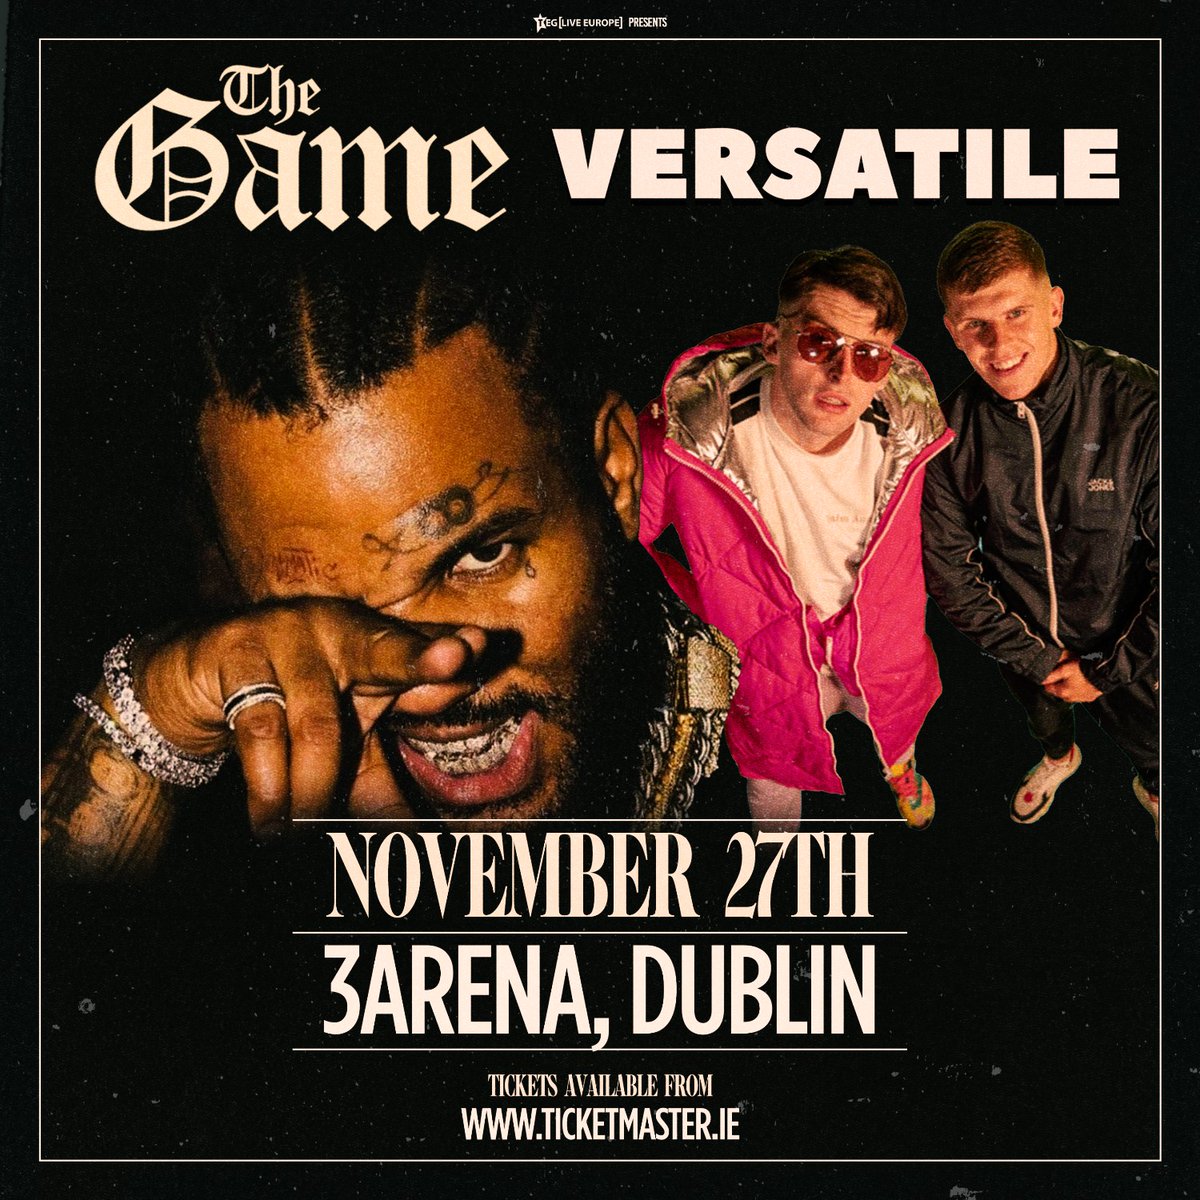 PRESALE LIVE | Presale tickets for The Game's 'DRILLMATIC' UK and Ireland tour are now available to buy! Secure your tickets now to see The Game in Belfast, and The Game + Versatile's HUGE co-headline at 3Arena, Dublin: bit.ly/TheGamePreSale…